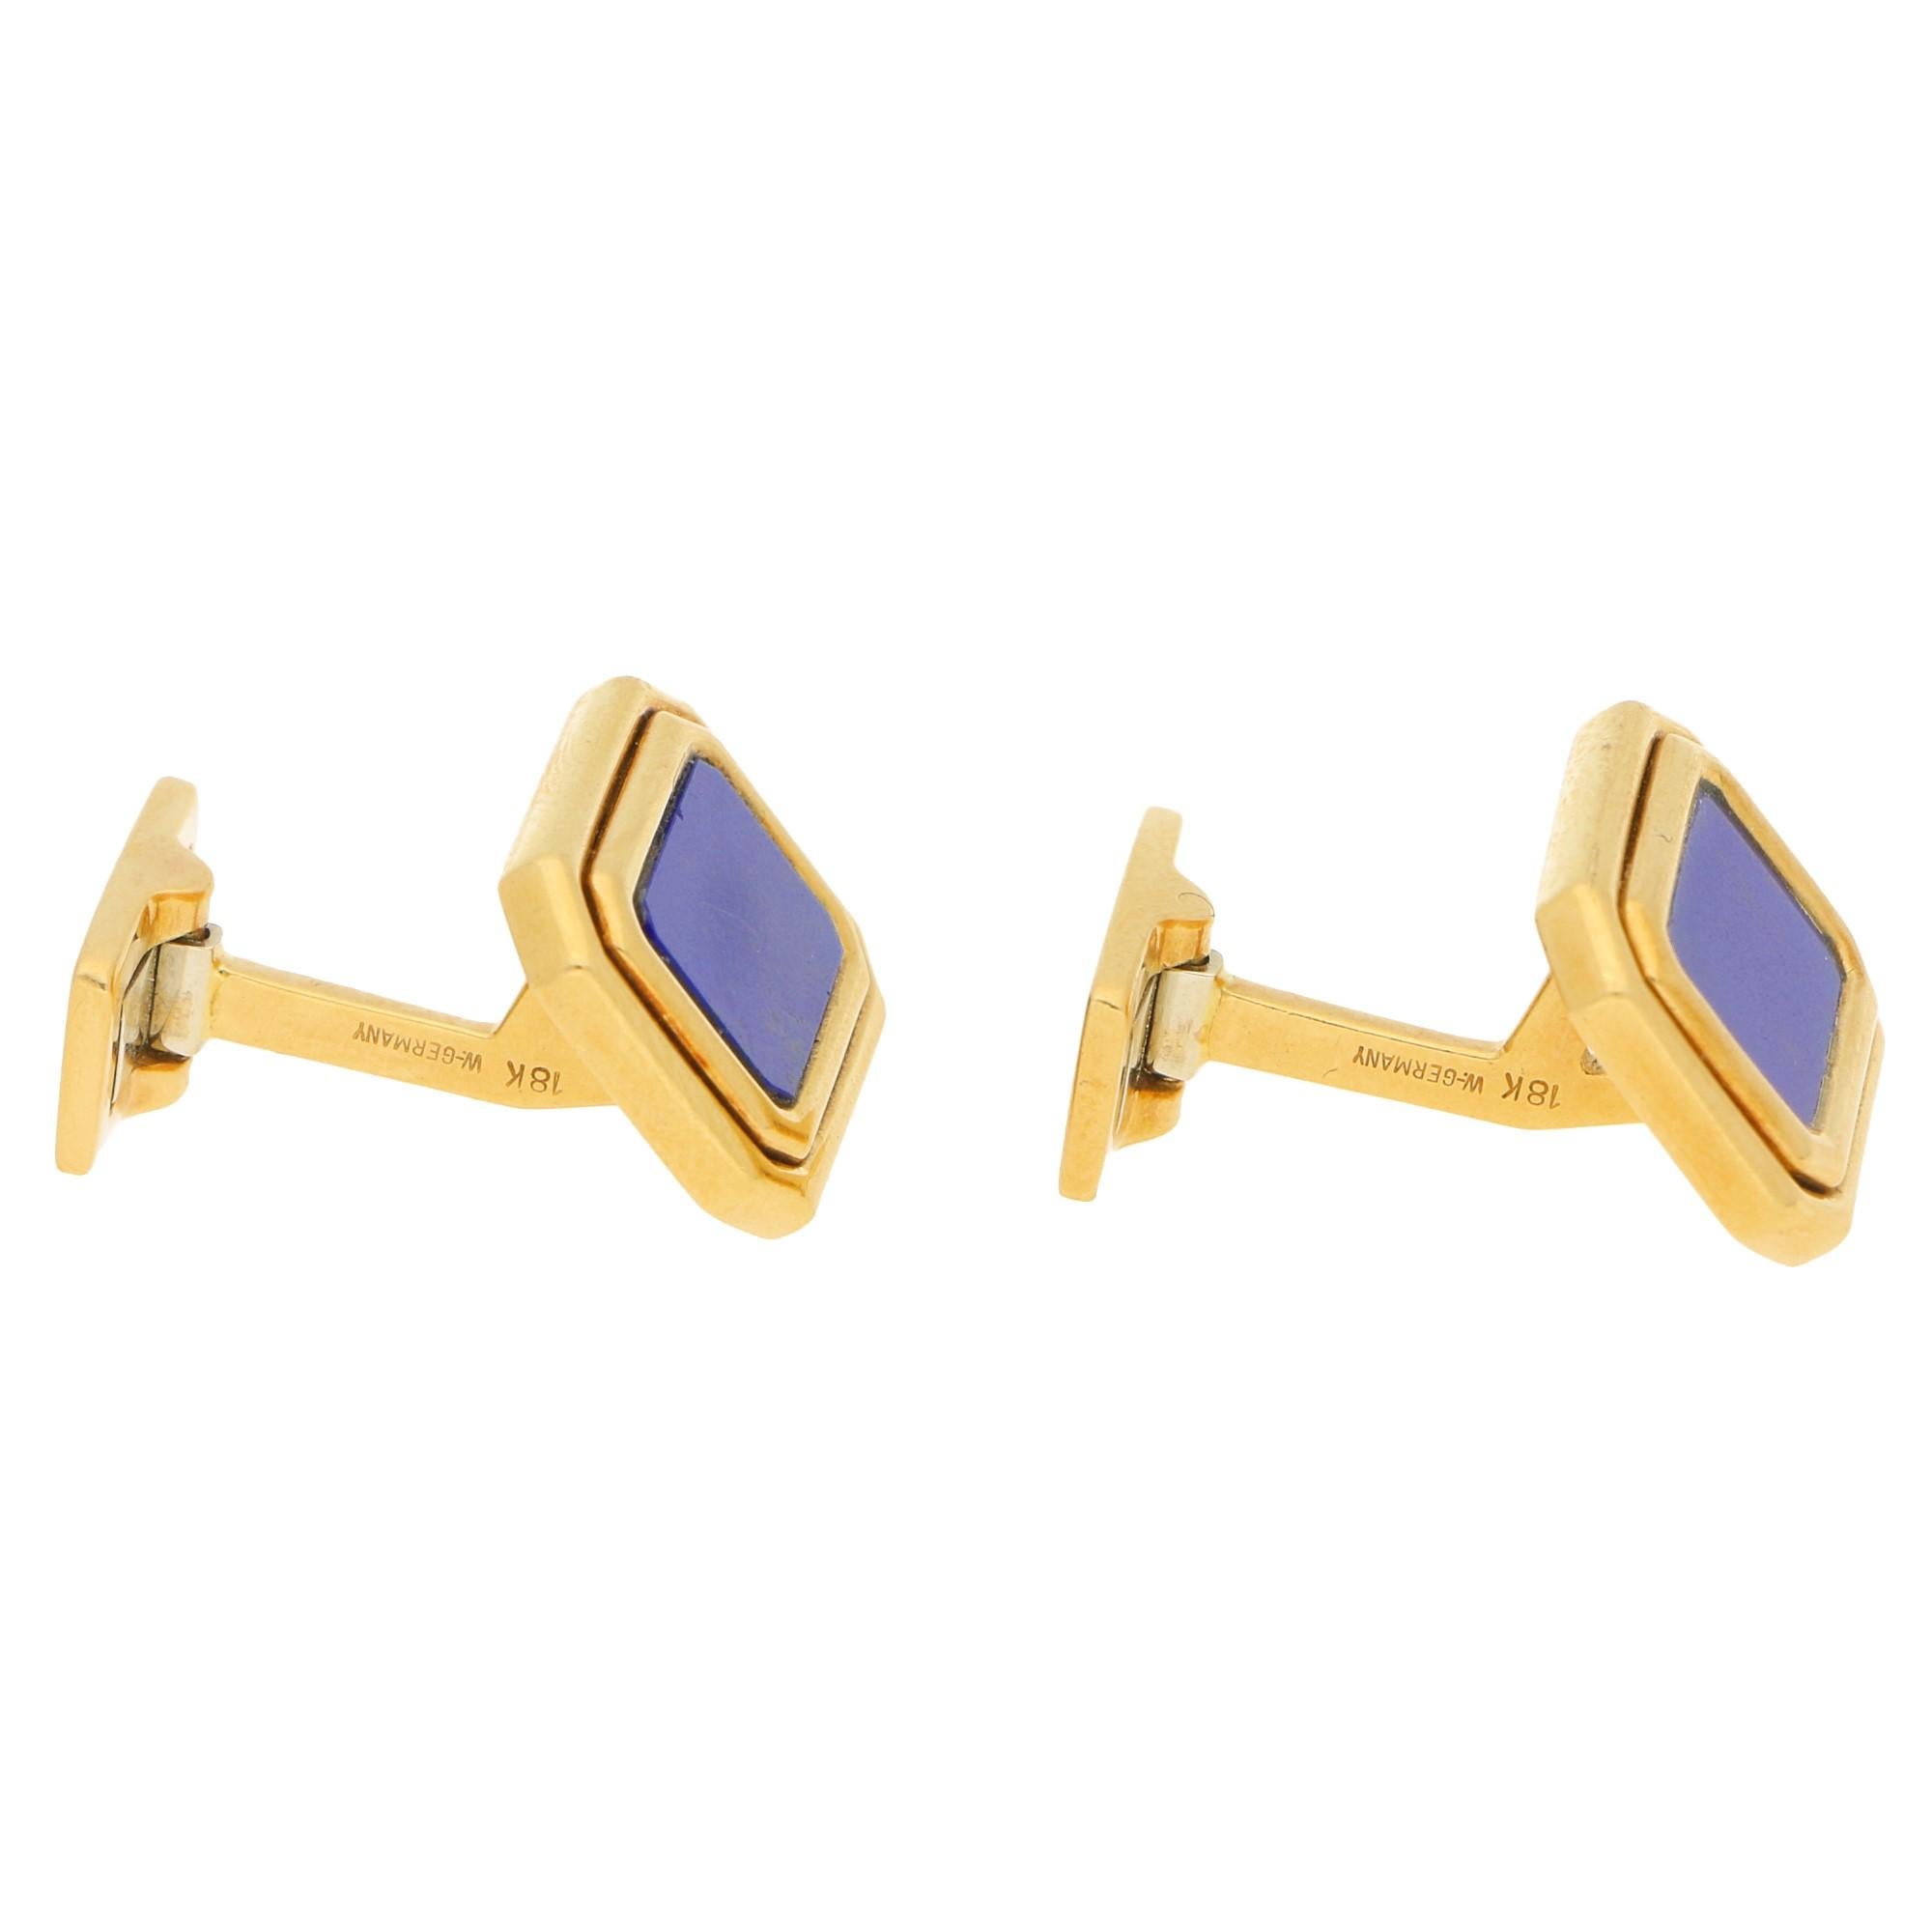 A pair of lapis lazuli swivel-back cufflinks in 18-karat yellow gold. Each cufflink features a rectangular lapis lazuli tablet within a double row yellow gold frame. Dimensions: 2.7x1.4cm.